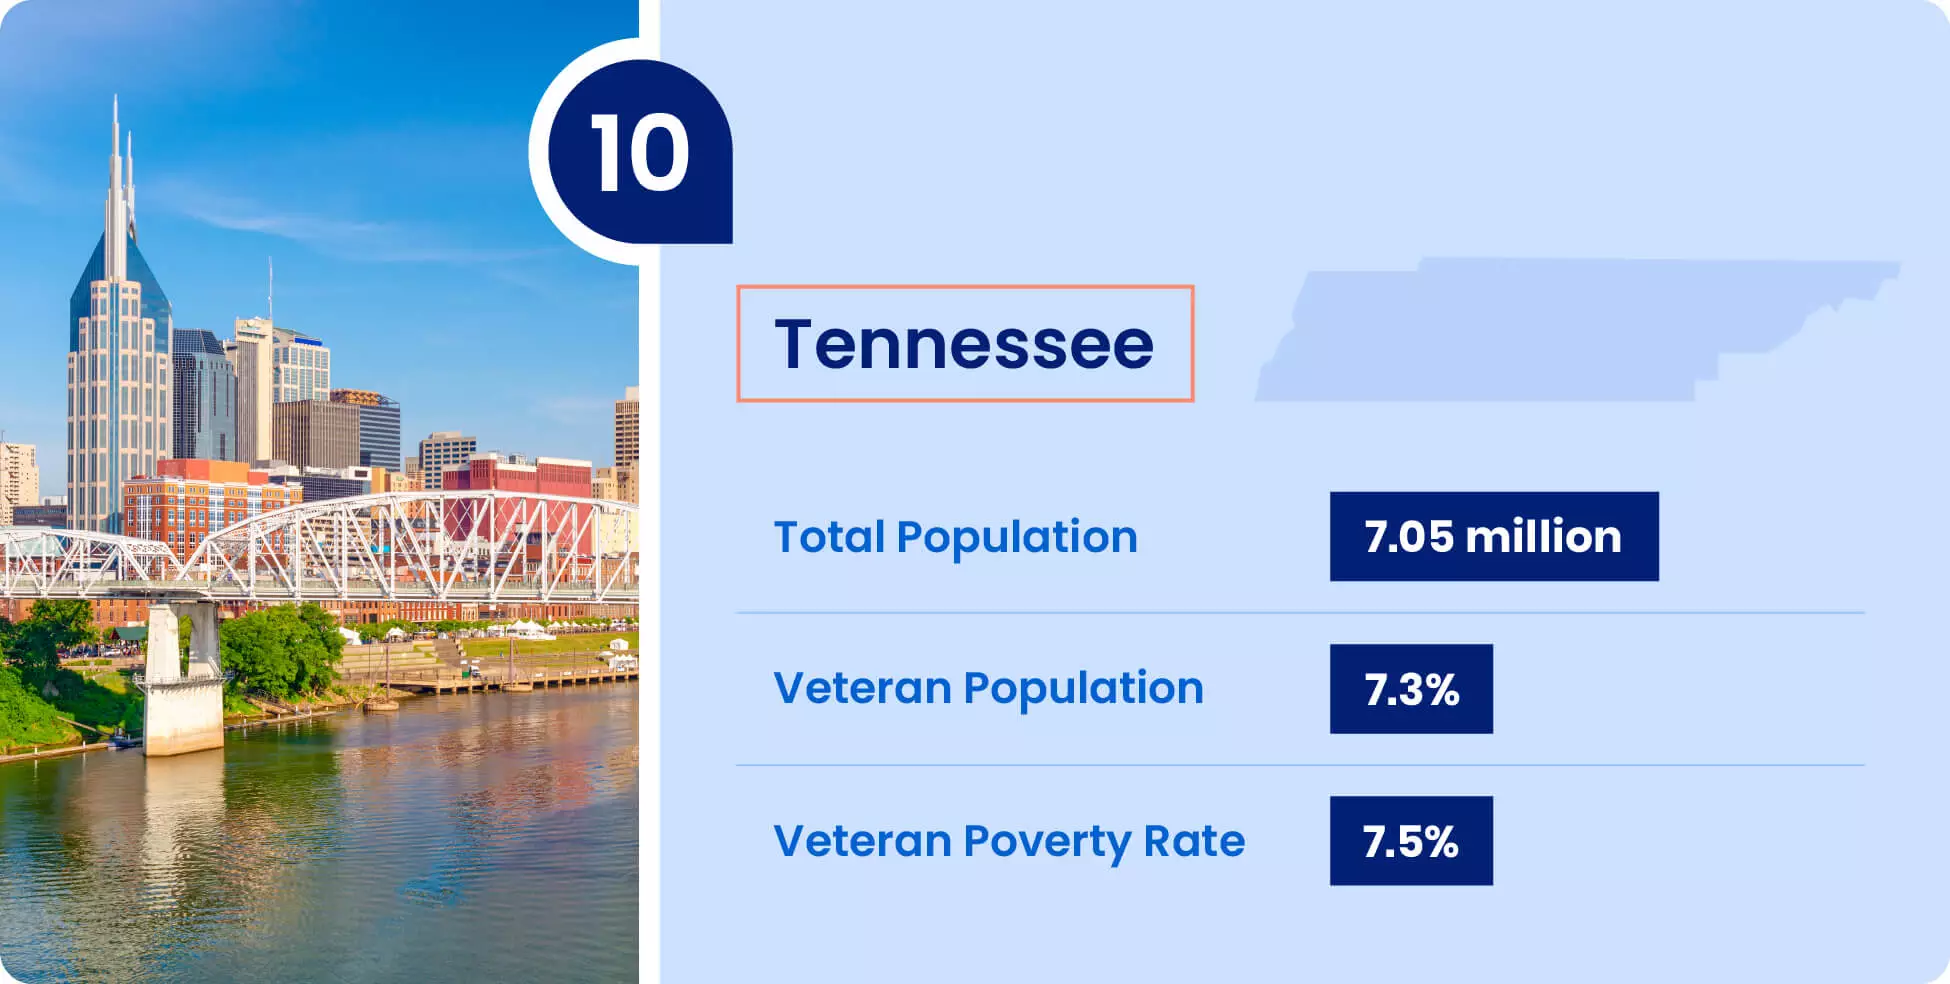 Image shows key information for military retirees thinking of moving to Tennessee.